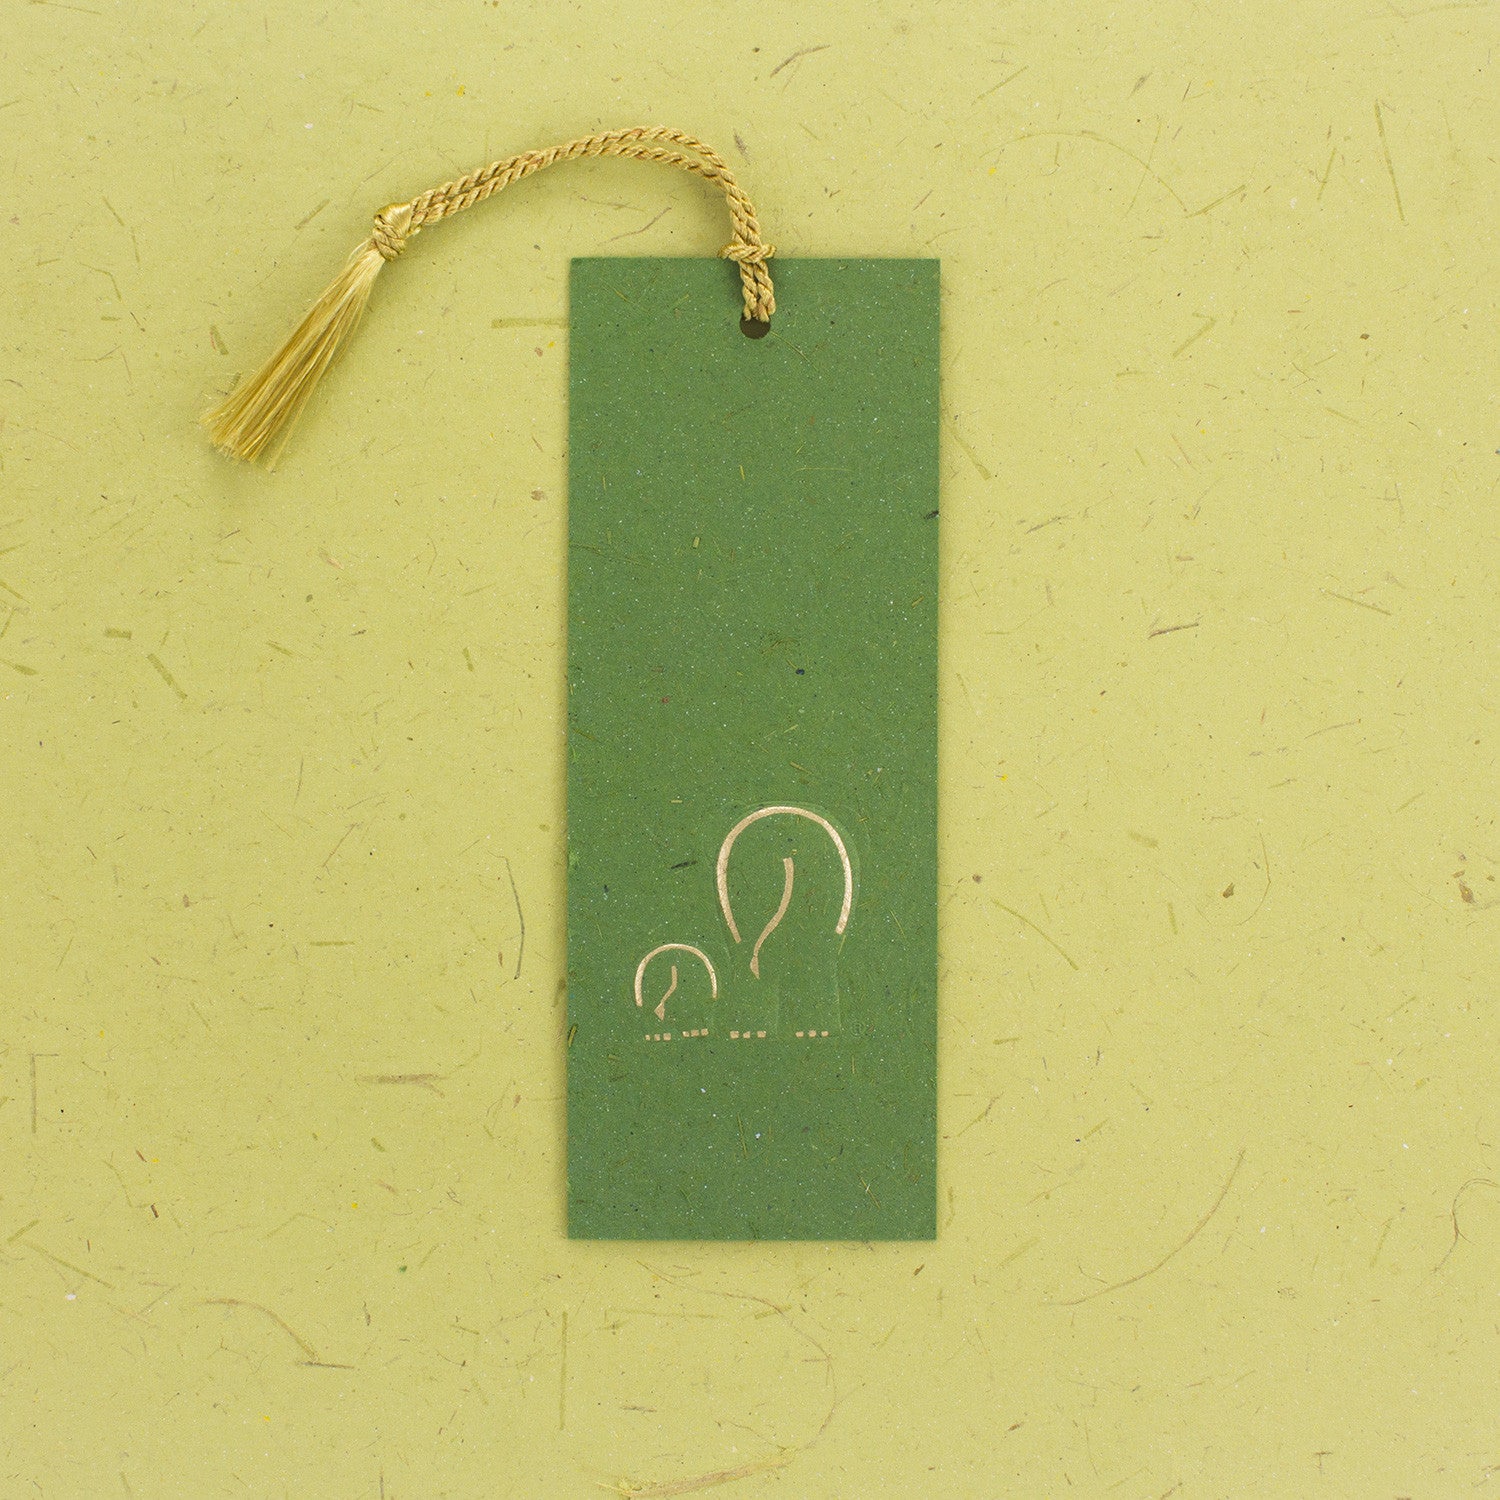 Elephant Dung Paper Bookmark Green with Tassle